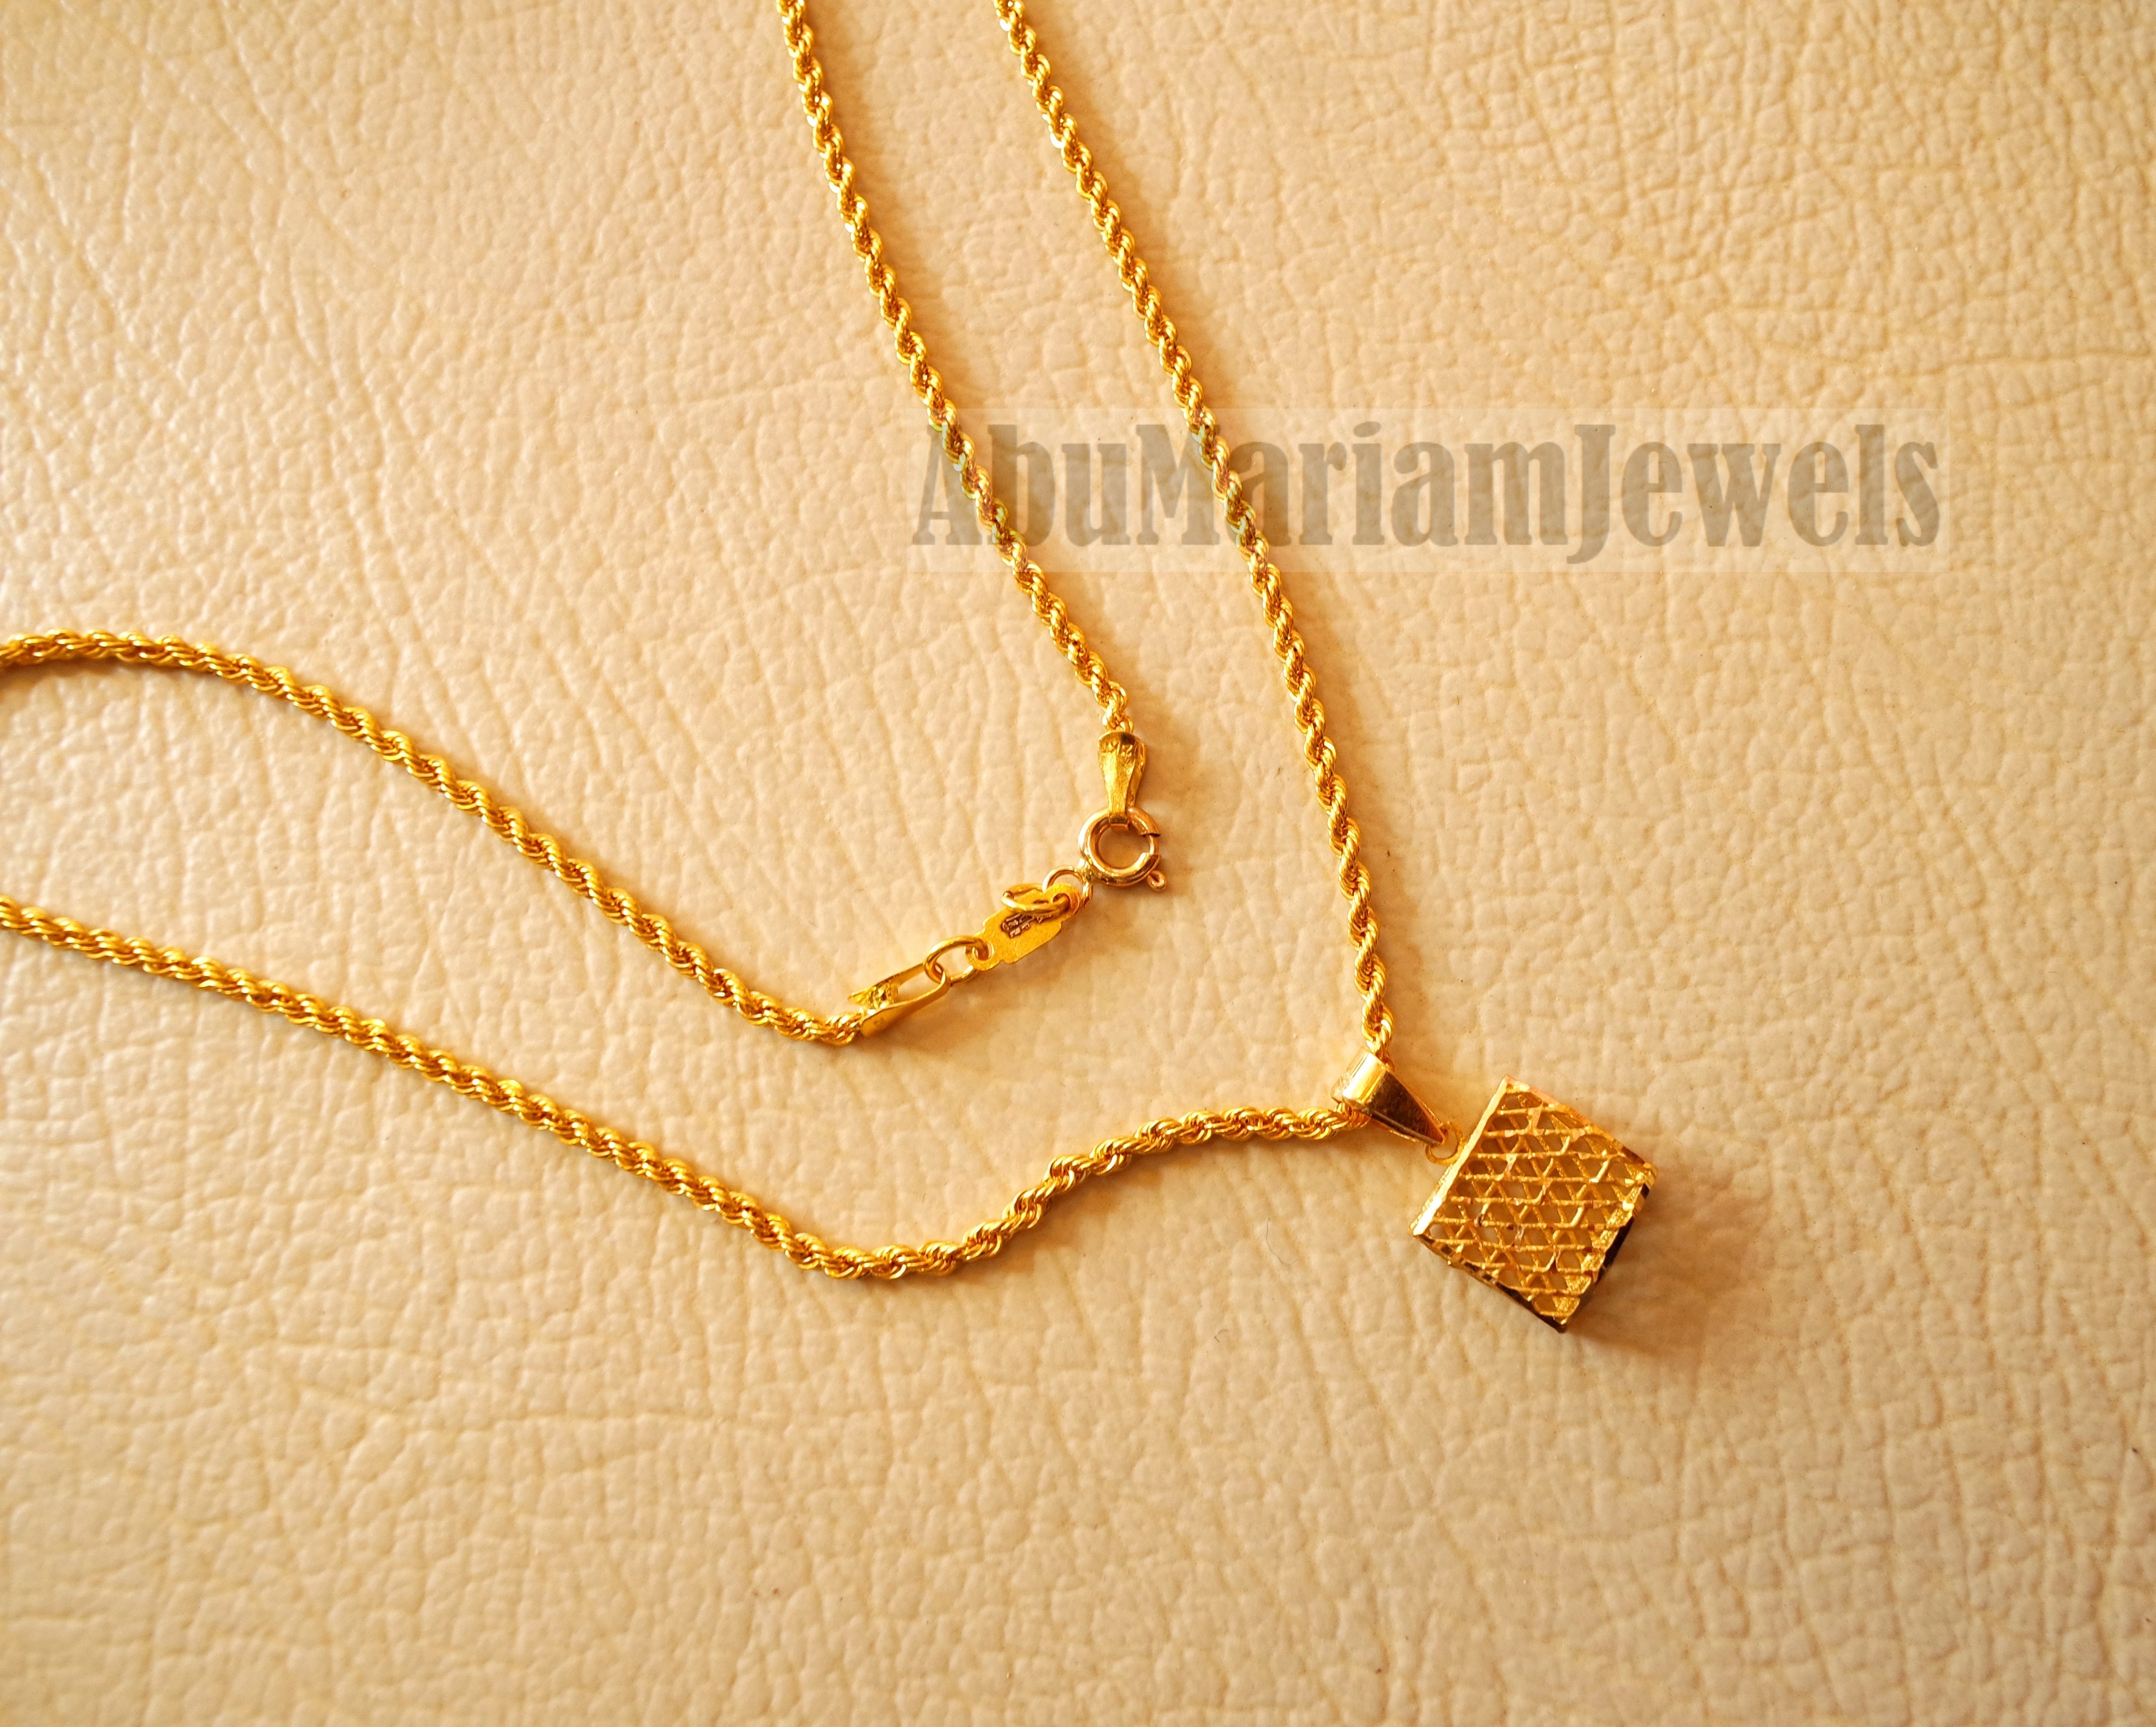 Square 3d 21 k gold pendant with rope chain fine jewelry necklace fast shipping